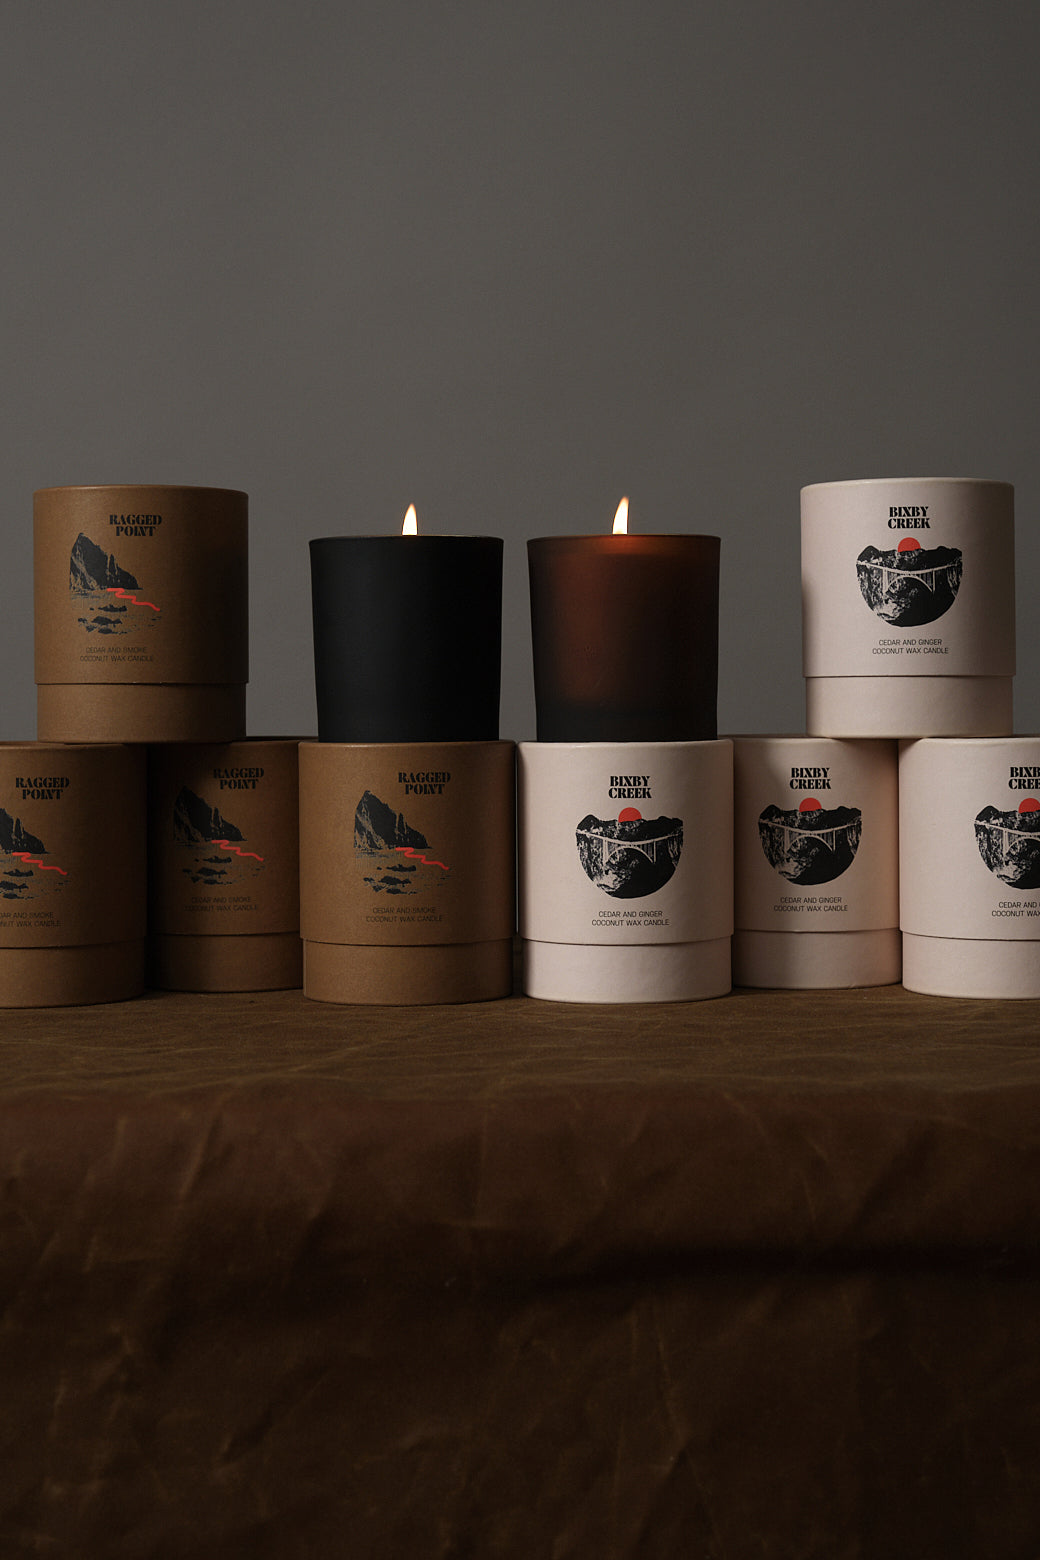 Save 25% off cedar and hyde candles